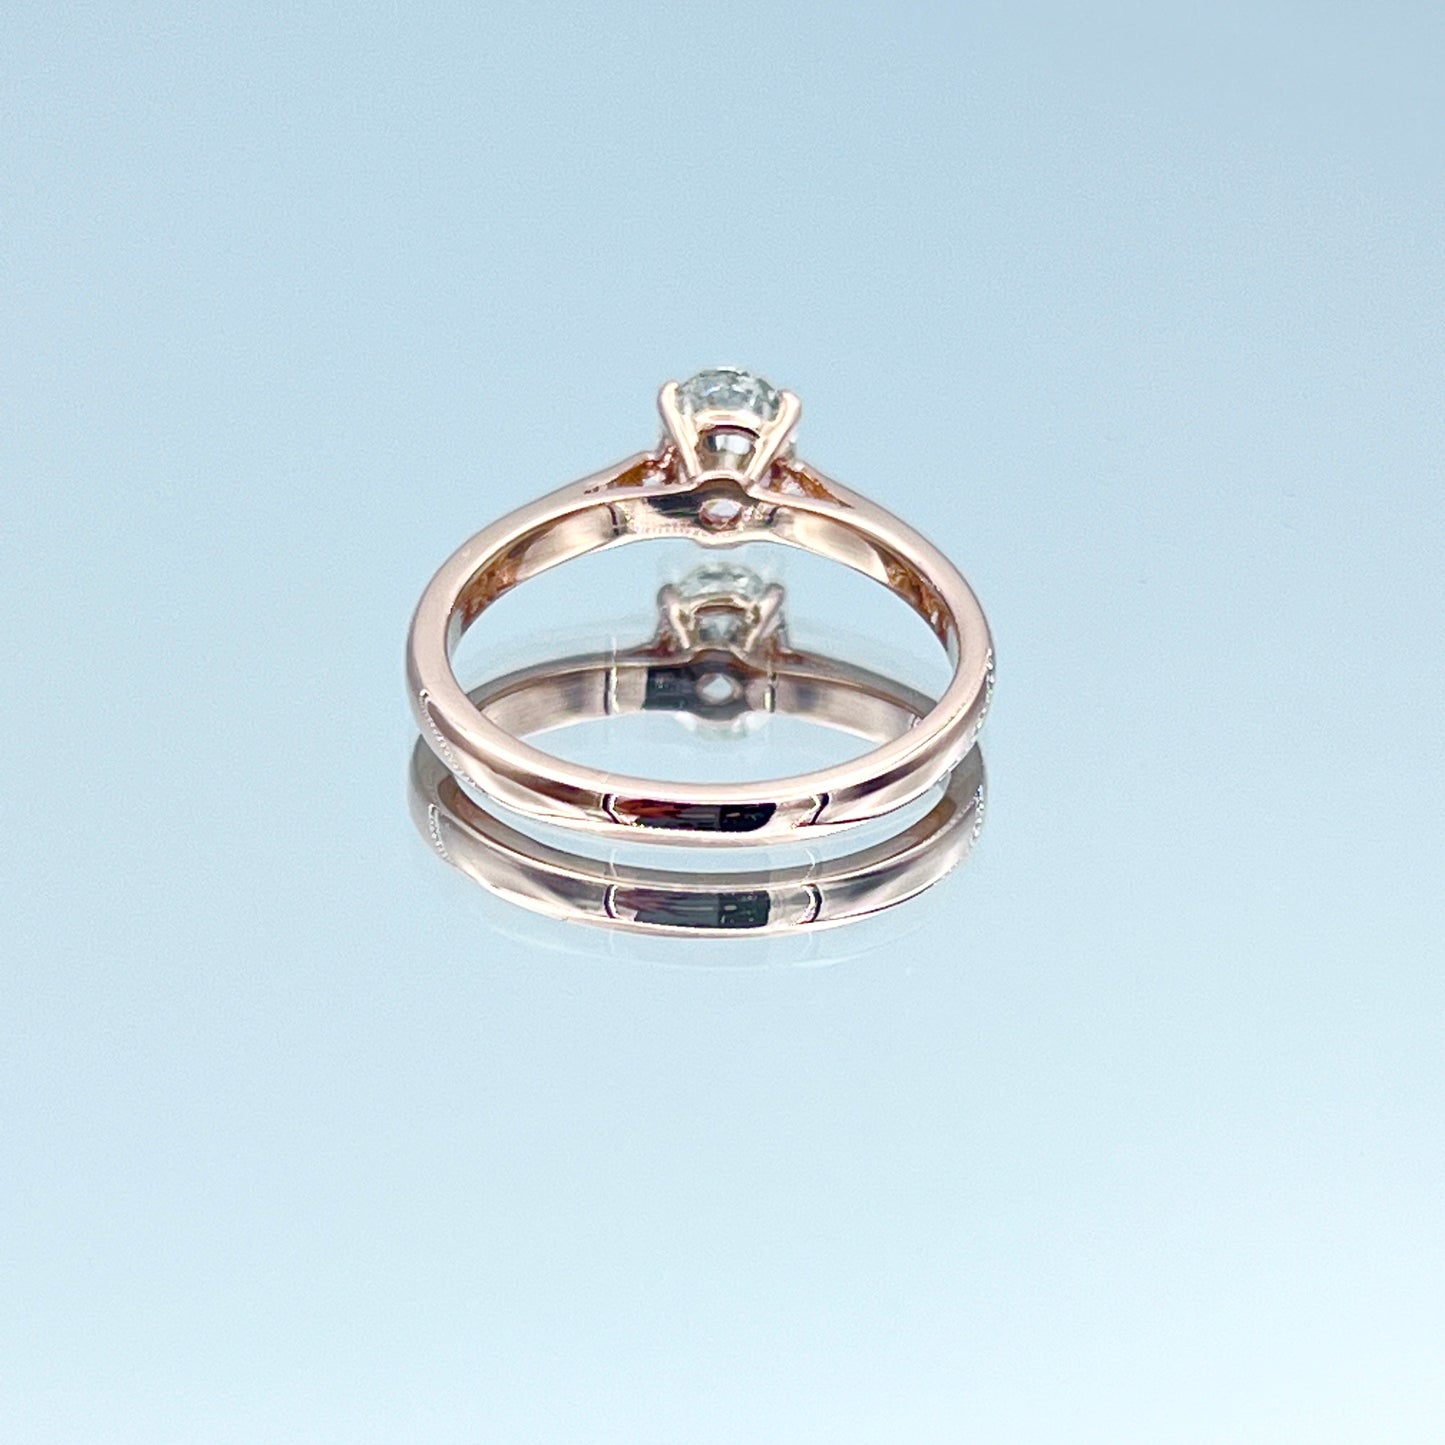 Solitaire Oval-Cut Diamond Engagement Ring in 14K Rose Gold - L and L Jewelry